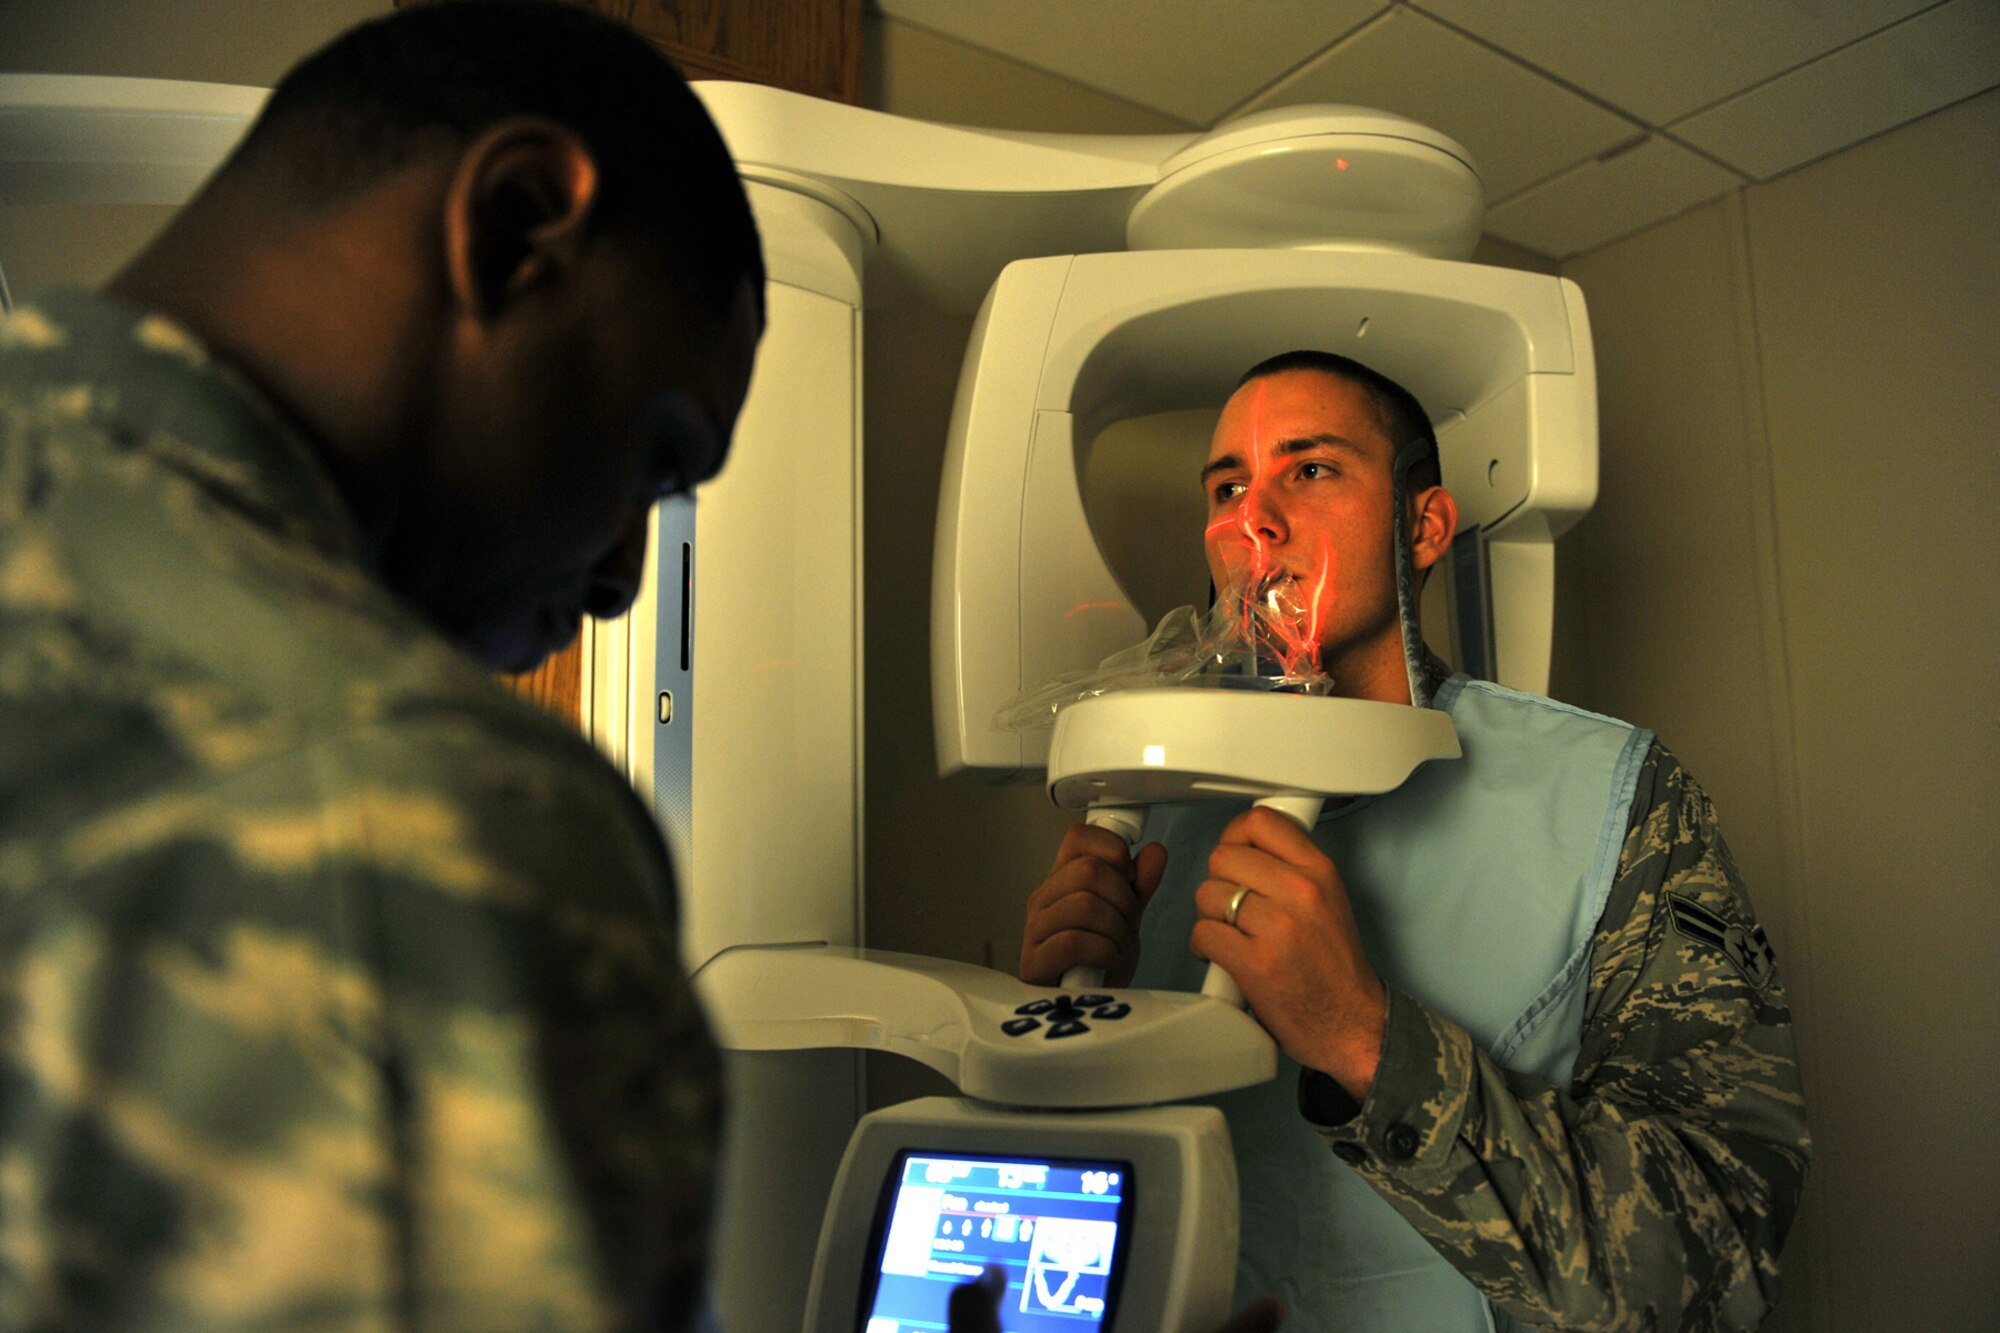 OFFUTT AIR FORCE Neb,.-- Staff Sgt. James Sheard, 55th Medical Group, takes a panoramic x-ray of Airman 1st Class Kyle Reed, also with the 55th MDG, inside the dental facility at the Ehrling Bergquist Clinic here April 26. The 55th MDG scored an outstanding rating on their recent Health Services Inspection becoming the first unit in the continental United States to do so this year. U.S. Air Force Photo by Charles Haymond

